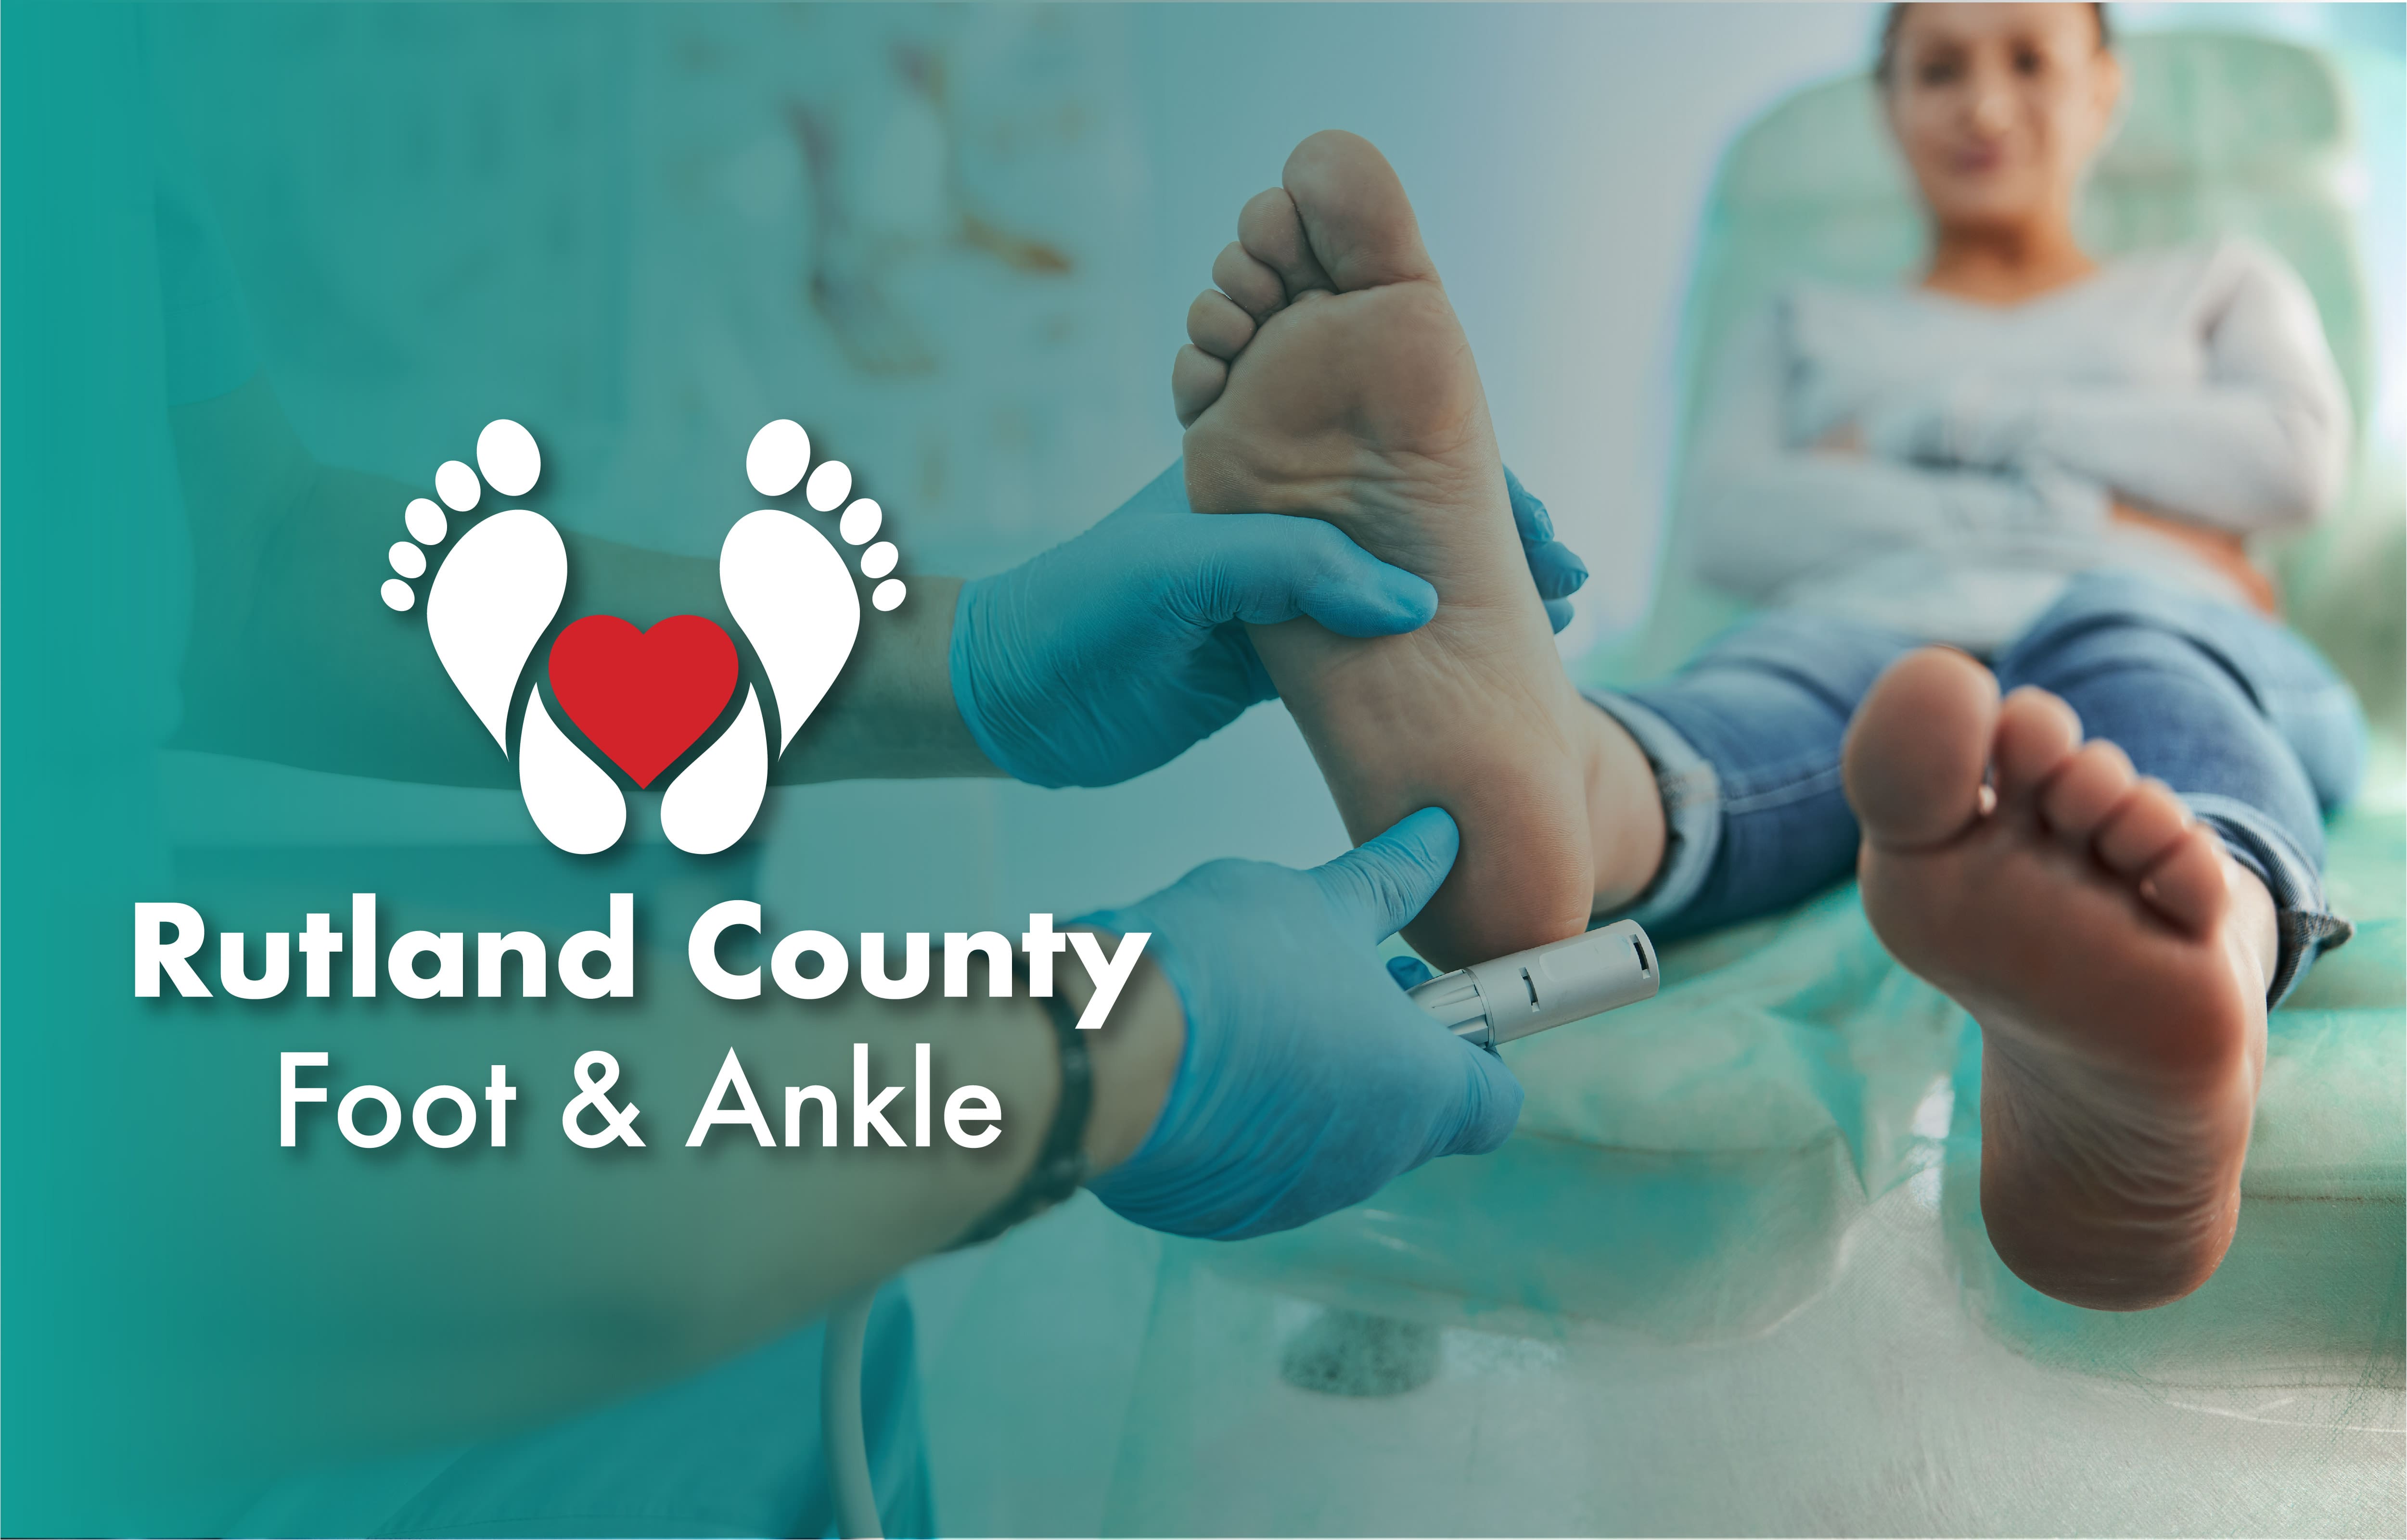 Podiatry Care Image with logo overlay